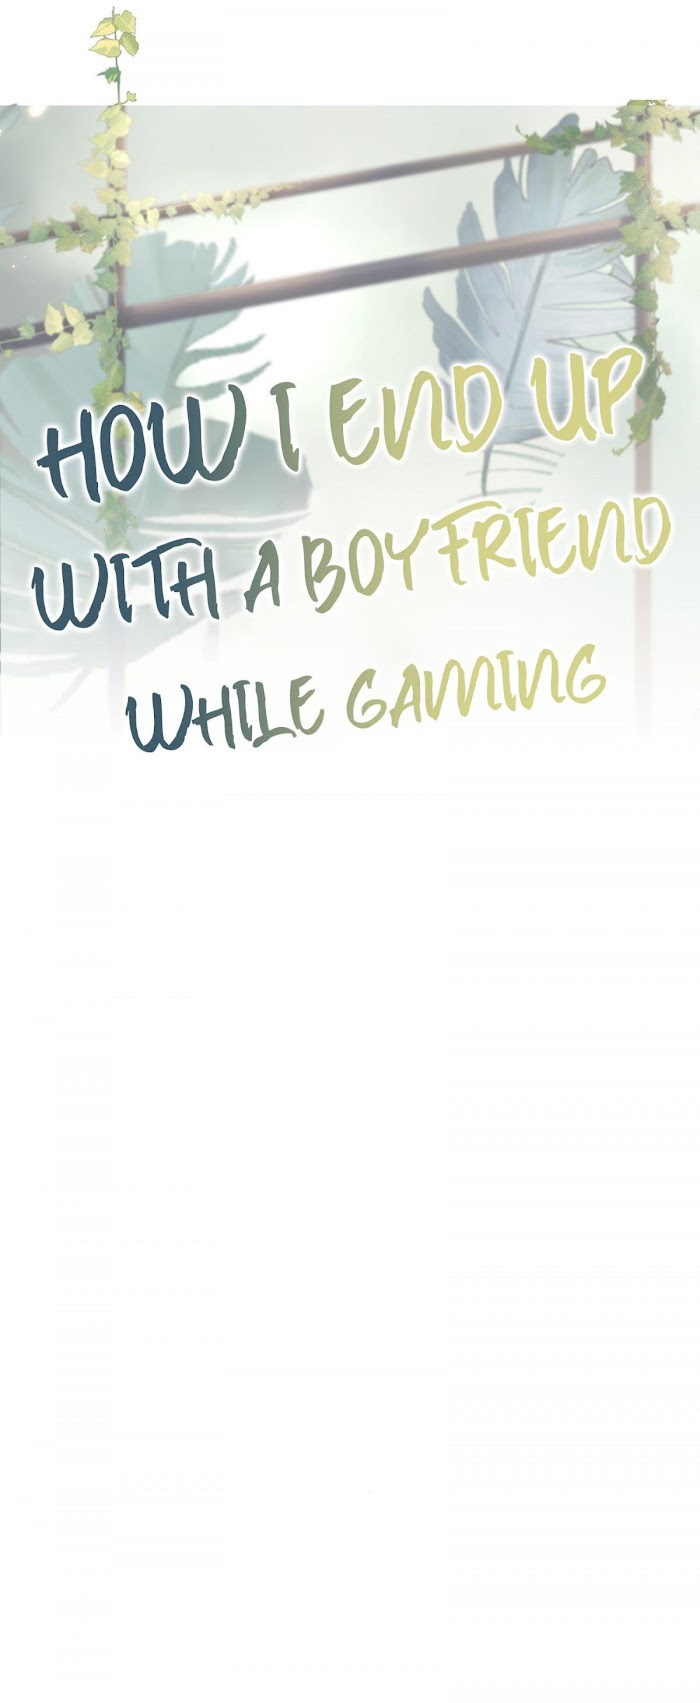 How Did I End Up With A Boyfriend While Gaming? - Page 2